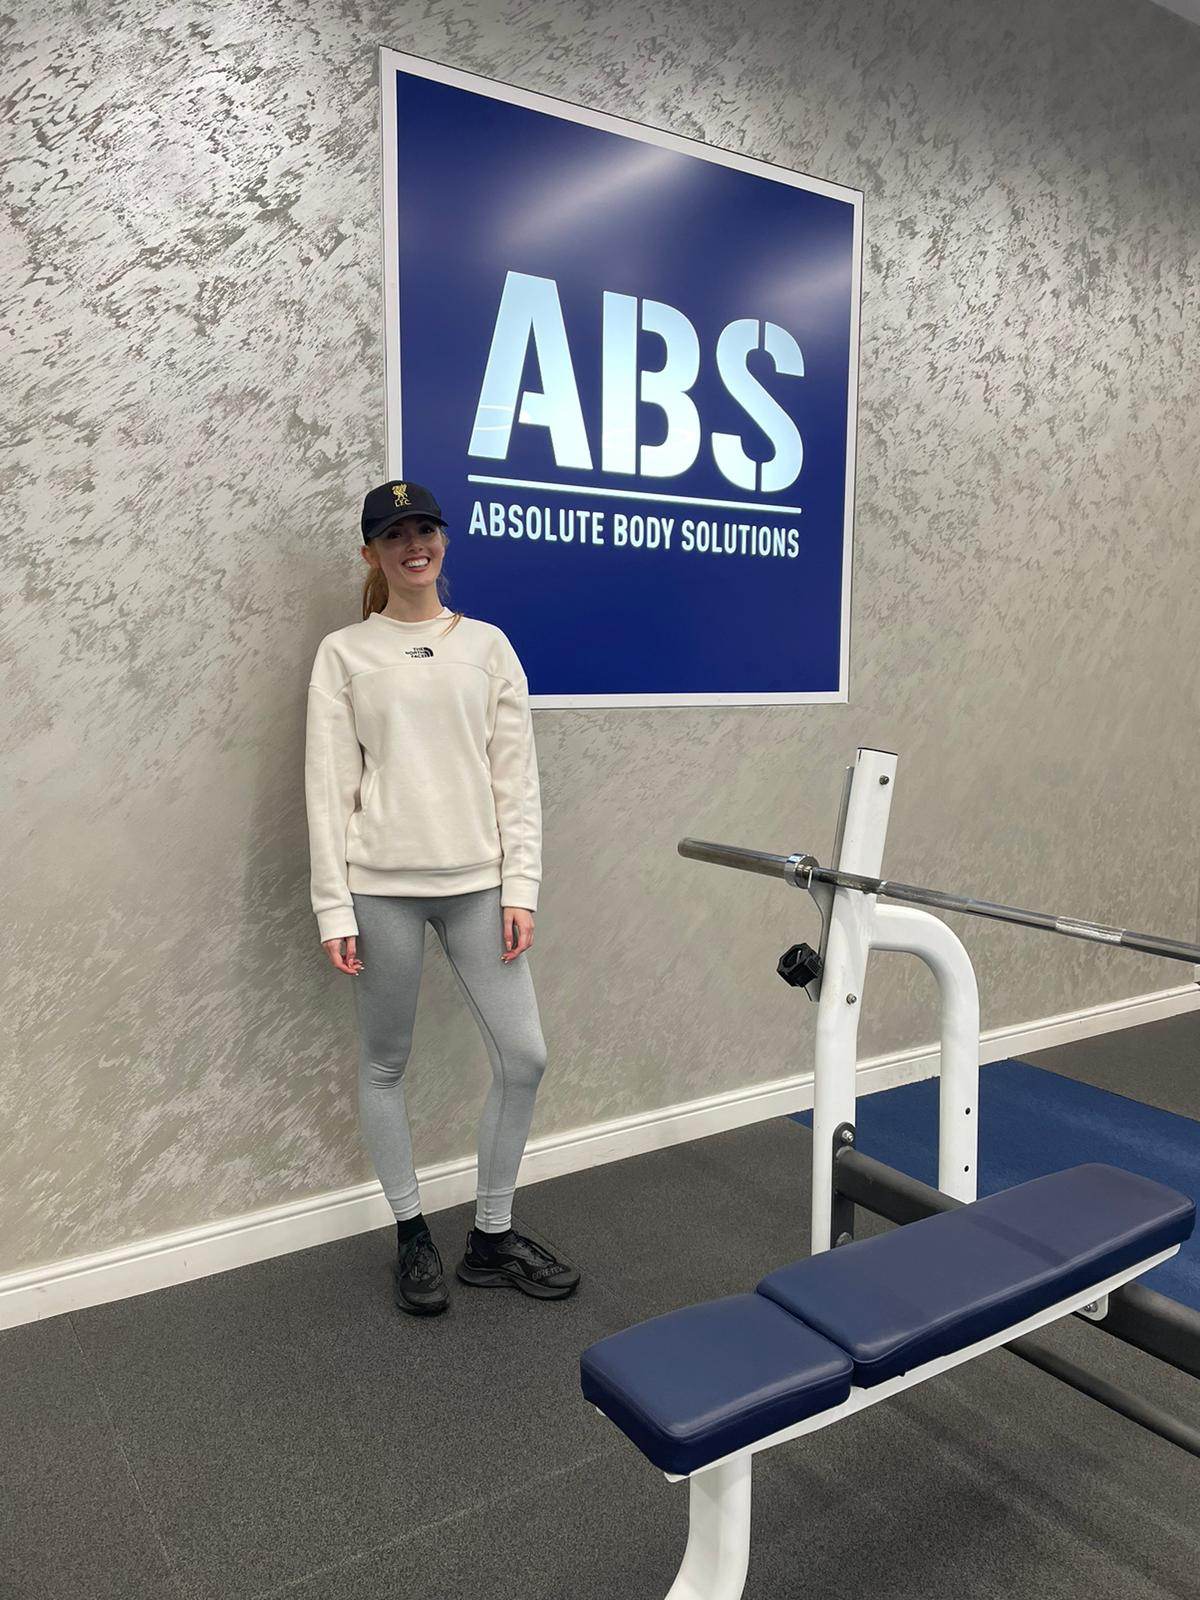 MISS ENGLAND JOINS ABS – ABSOLUTE BODY SOLUTIONS IN LIVERPOOL!